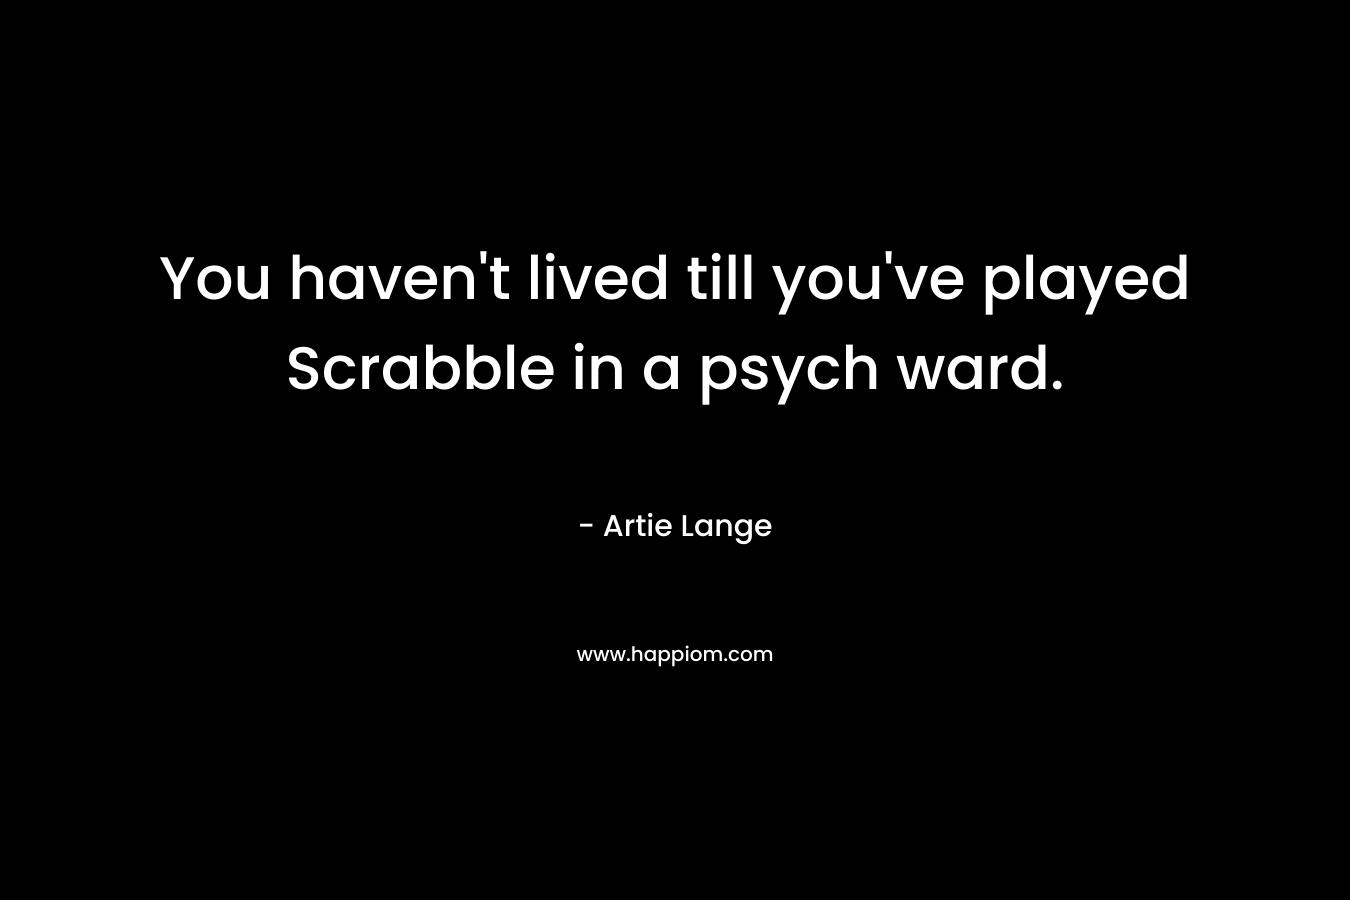 You haven't lived till you've played Scrabble in a psych ward.